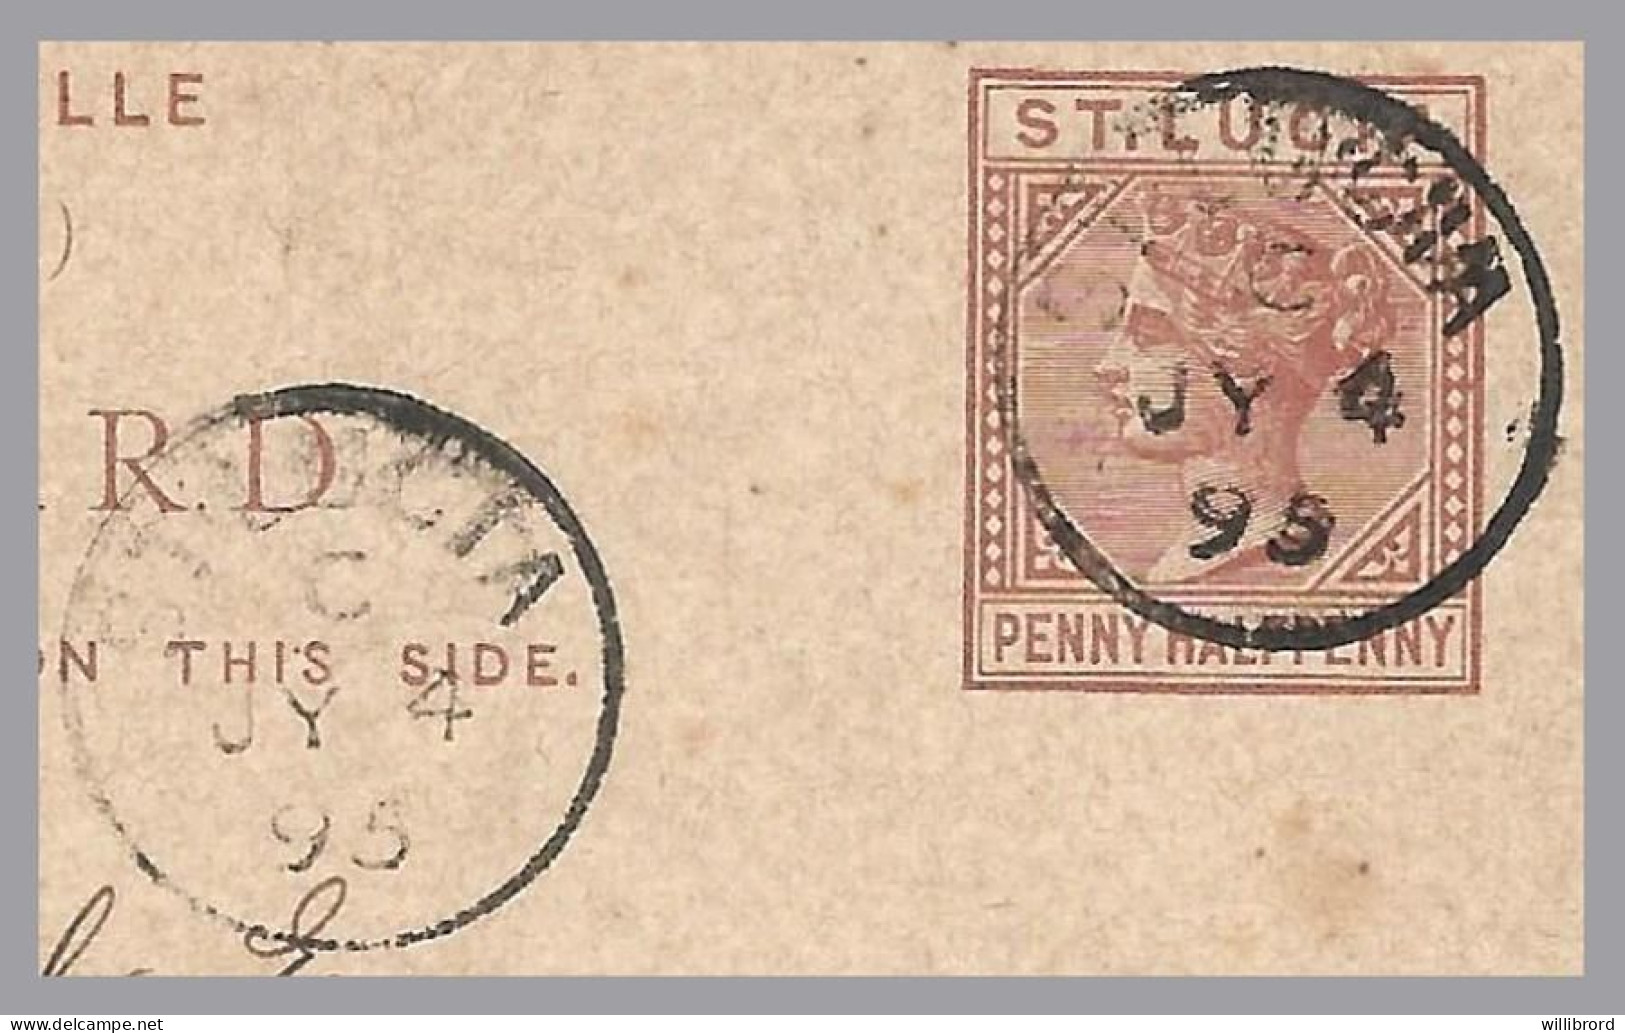 GREAT BRITAIN - ST. LUCIA - 1895 1½d QV Postal Stationery Card - Used To Cetinje, MONTENEGRO - Covers & Documents